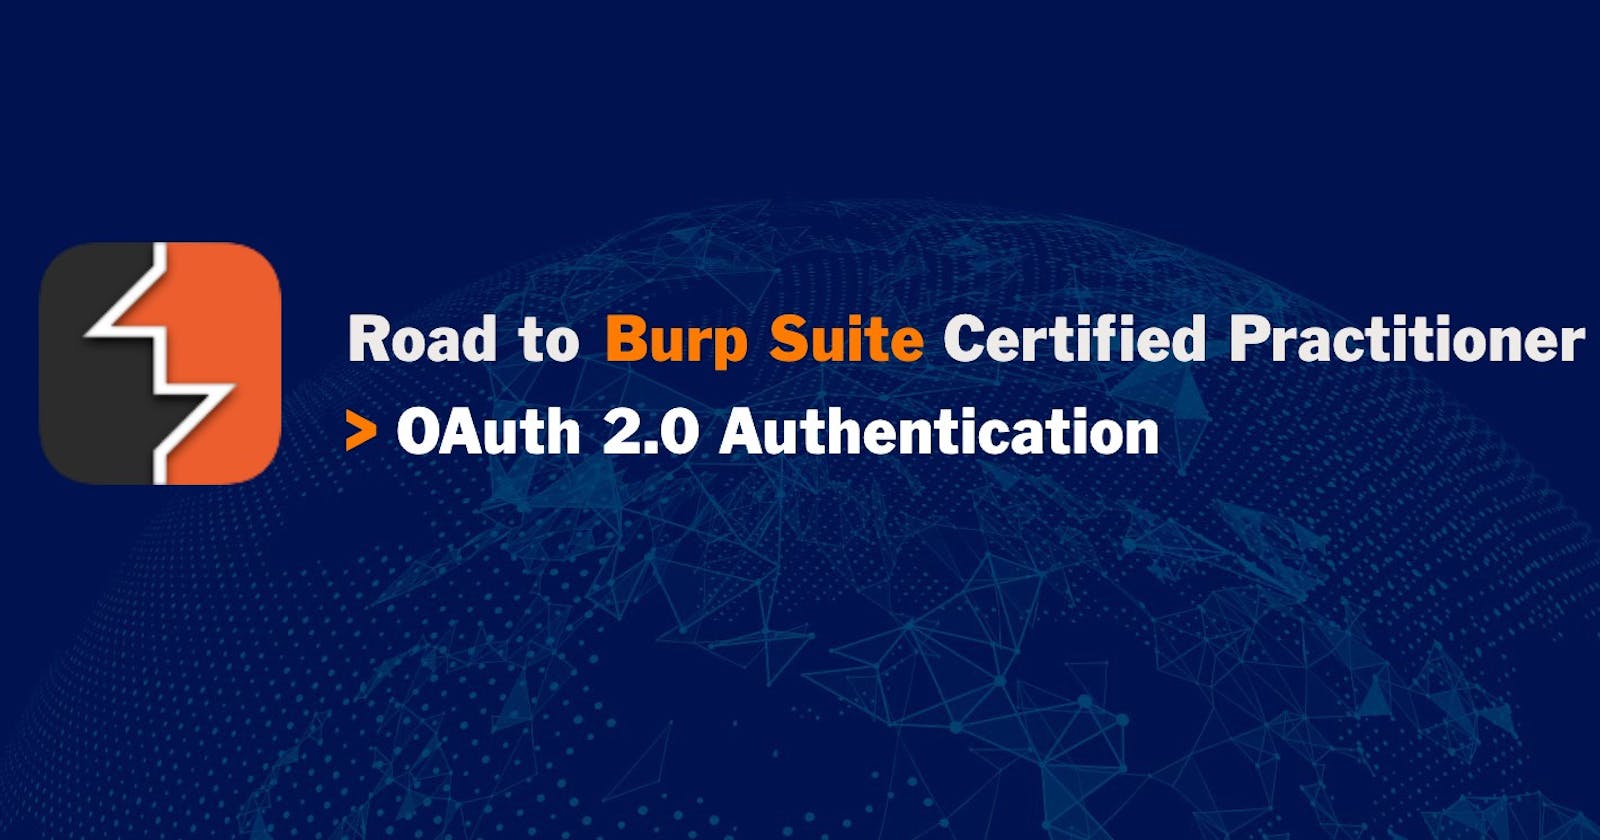 Road to BSCP - OAuth 2.0 authentication